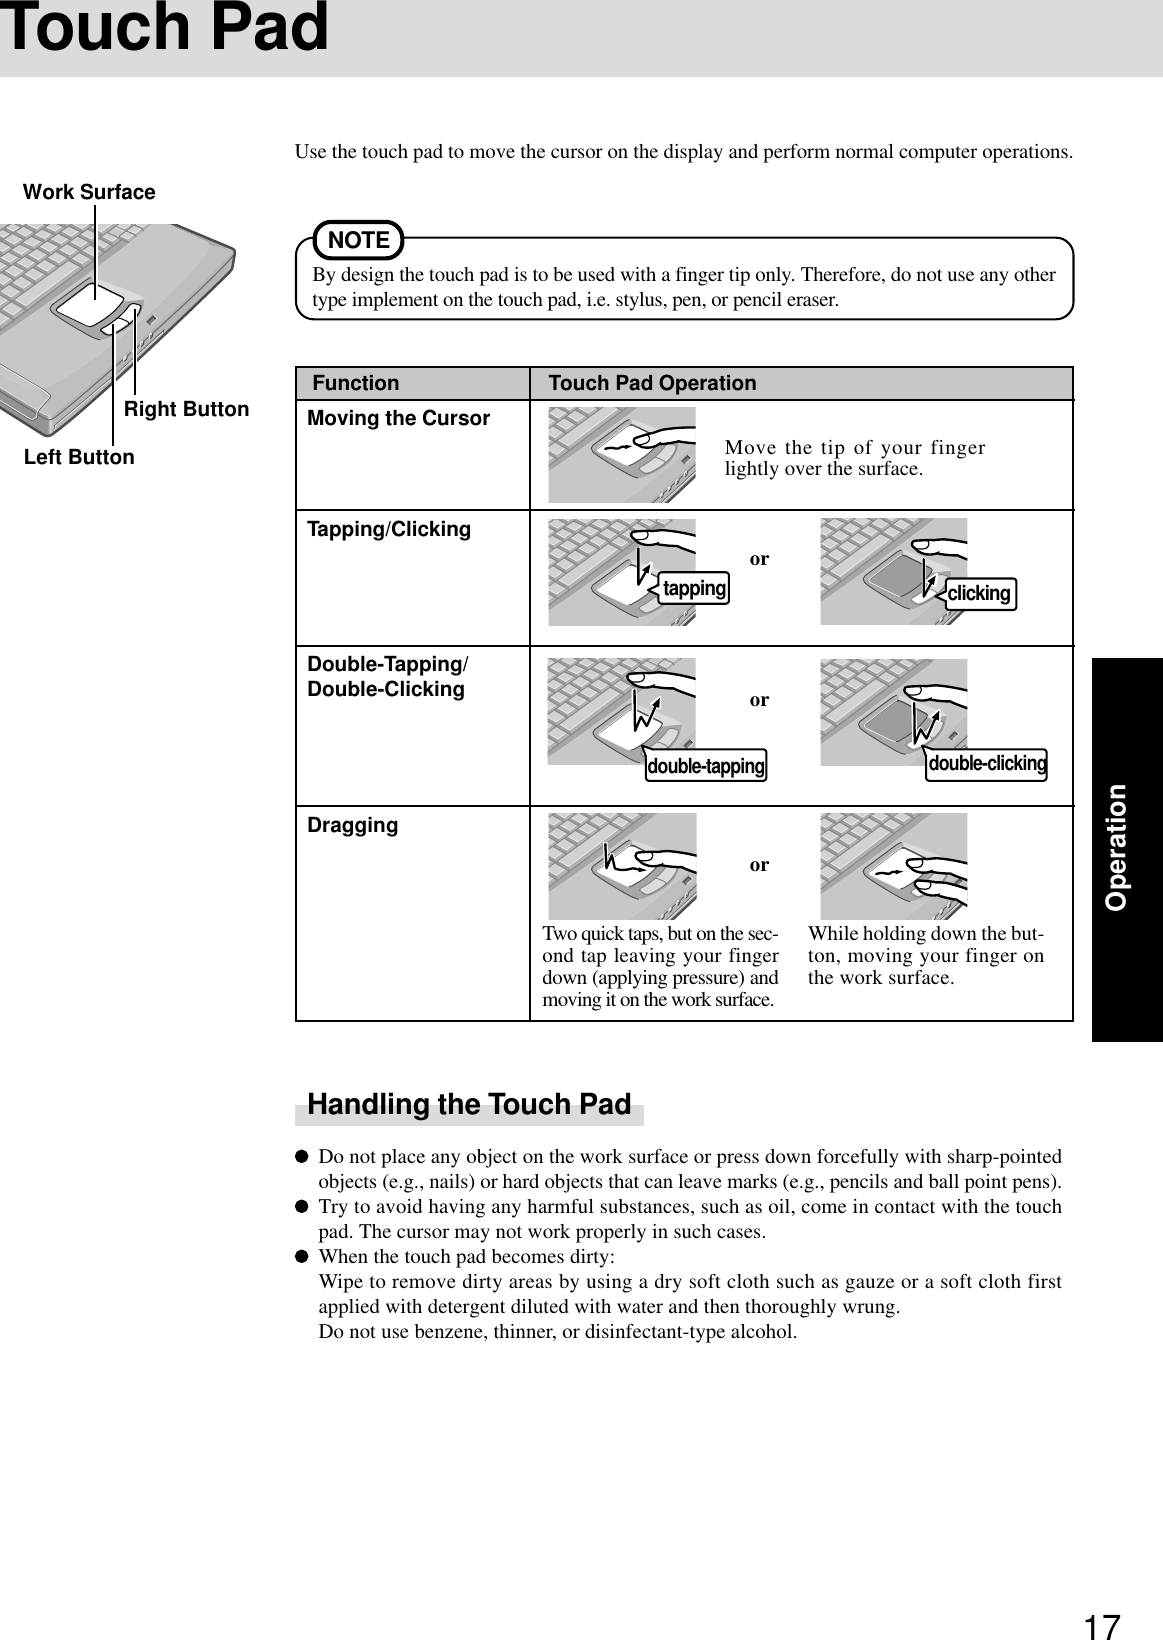 17OperationFunctionTouch PadUse the touch pad to move the cursor on the display and perform normal computer operations.Do not place any object on the work surface or press down forcefully with sharp-pointedobjects (e.g., nails) or hard objects that can leave marks (e.g., pencils and ball point pens).Try to avoid having any harmful substances, such as oil, come in contact with the touchpad. The cursor may not work properly in such cases.When the touch pad becomes dirty:Wipe to remove dirty areas by using a dry soft cloth such as gauze or a soft cloth firstapplied with detergent diluted with water and then thoroughly wrung.Do not use benzene, thinner, or disinfectant-type alcohol.By design the touch pad is to be used with a finger tip only. Therefore, do not use any othertype implement on the touch pad, i.e. stylus, pen, or pencil eraser.Left ButtonRight ButtonWork SurfaceNOTEorTwo quick taps, but on the sec-ond tap leaving your fingerdown (applying pressure) andmoving it on the work surface.While holding down the but-ton, moving your finger onthe work surface.orTouch Pad OperationMoving the CursorTapping/ClickingDouble-Tapping/Double-ClickingDraggingorMove the tip of your fingerlightly over the surface.tapping clickingdouble-tapping double-clickingHandling the Touch Pad